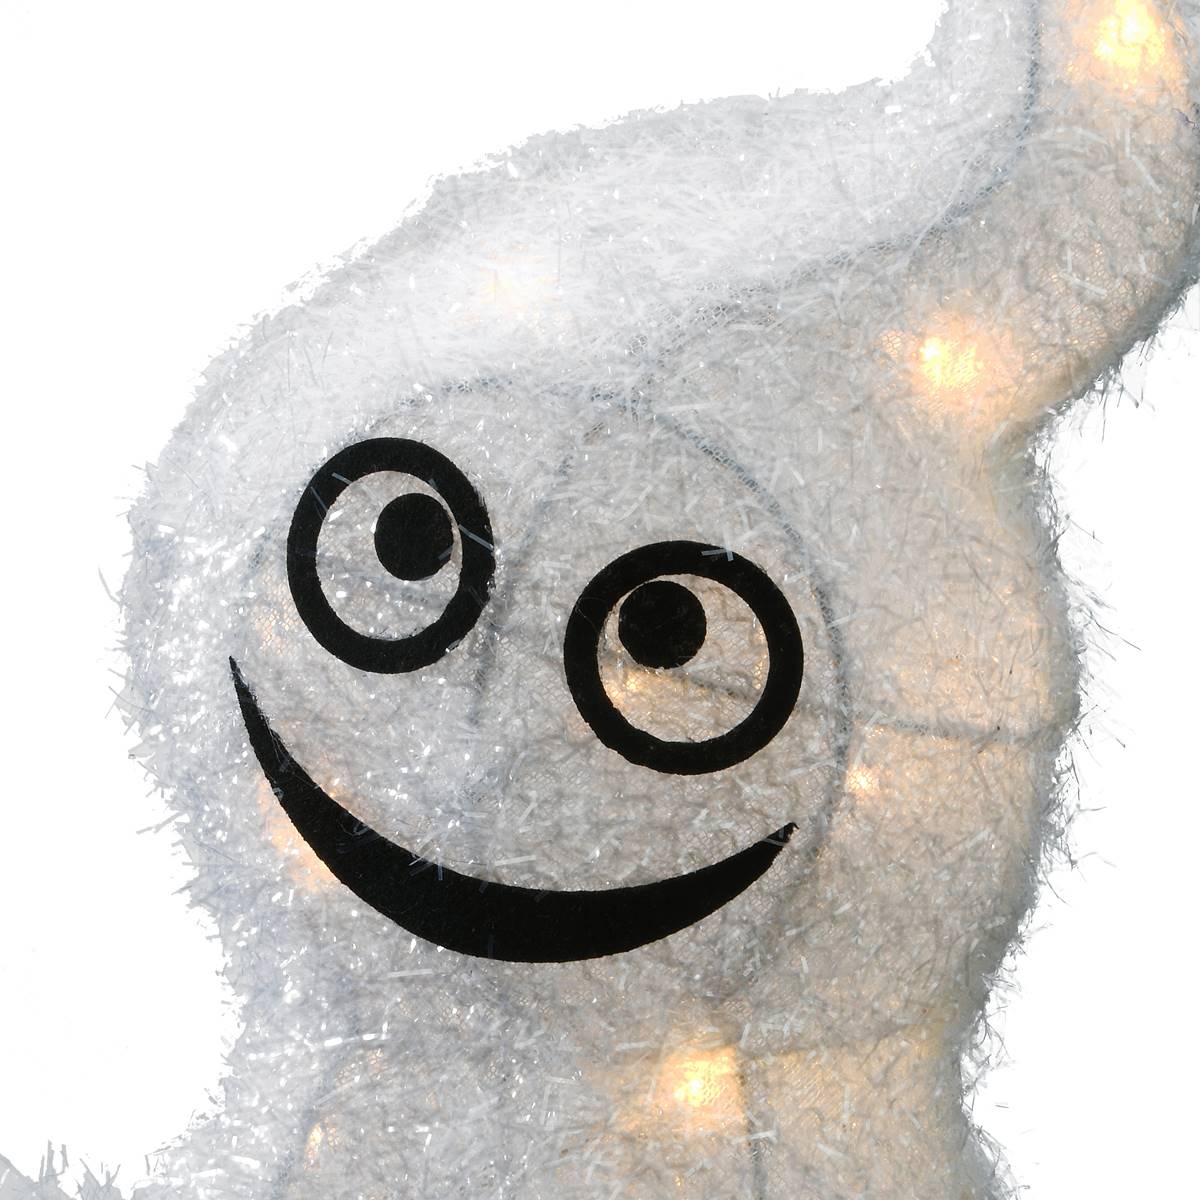 National Tree 18in. Pre-Lit Smiling Ghost Decor